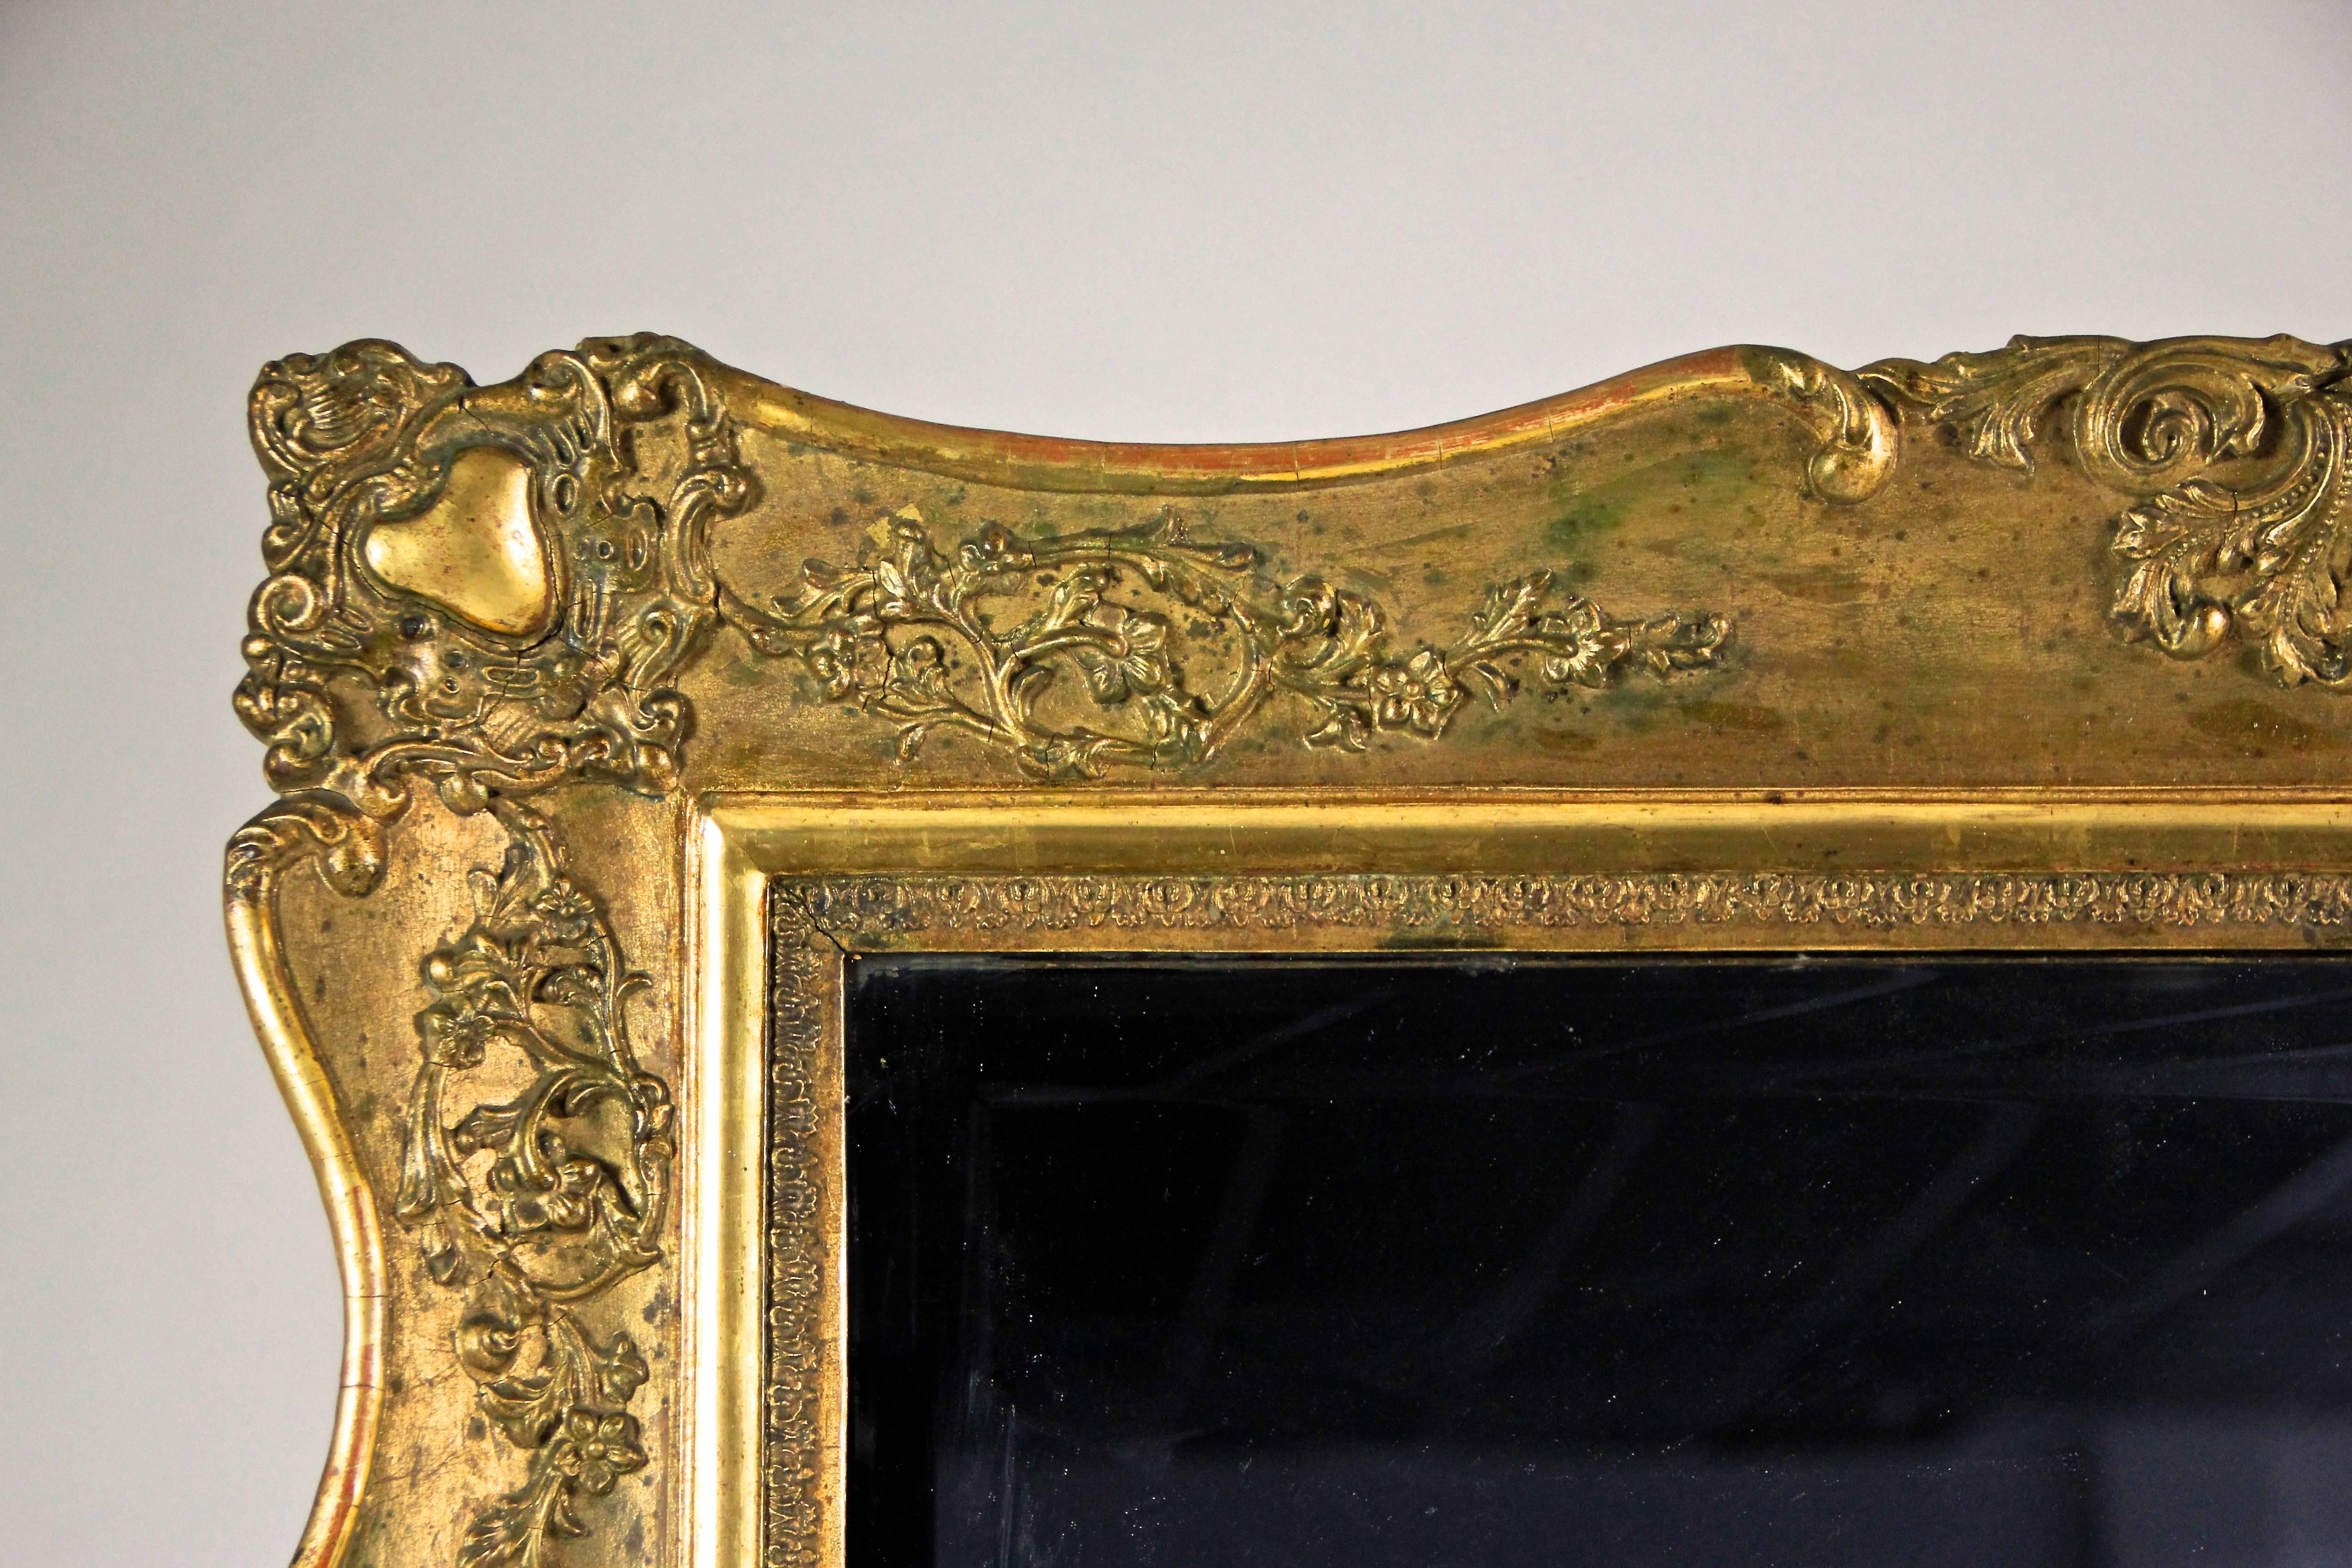 Large gilt wall mirror from the Biedermeier period in Austria from the early 19th century, circa 1830. The gilt artful processed frame is adorned by beautiful floral stucco works and covered by an absolute great looking patina. The mirror glass,